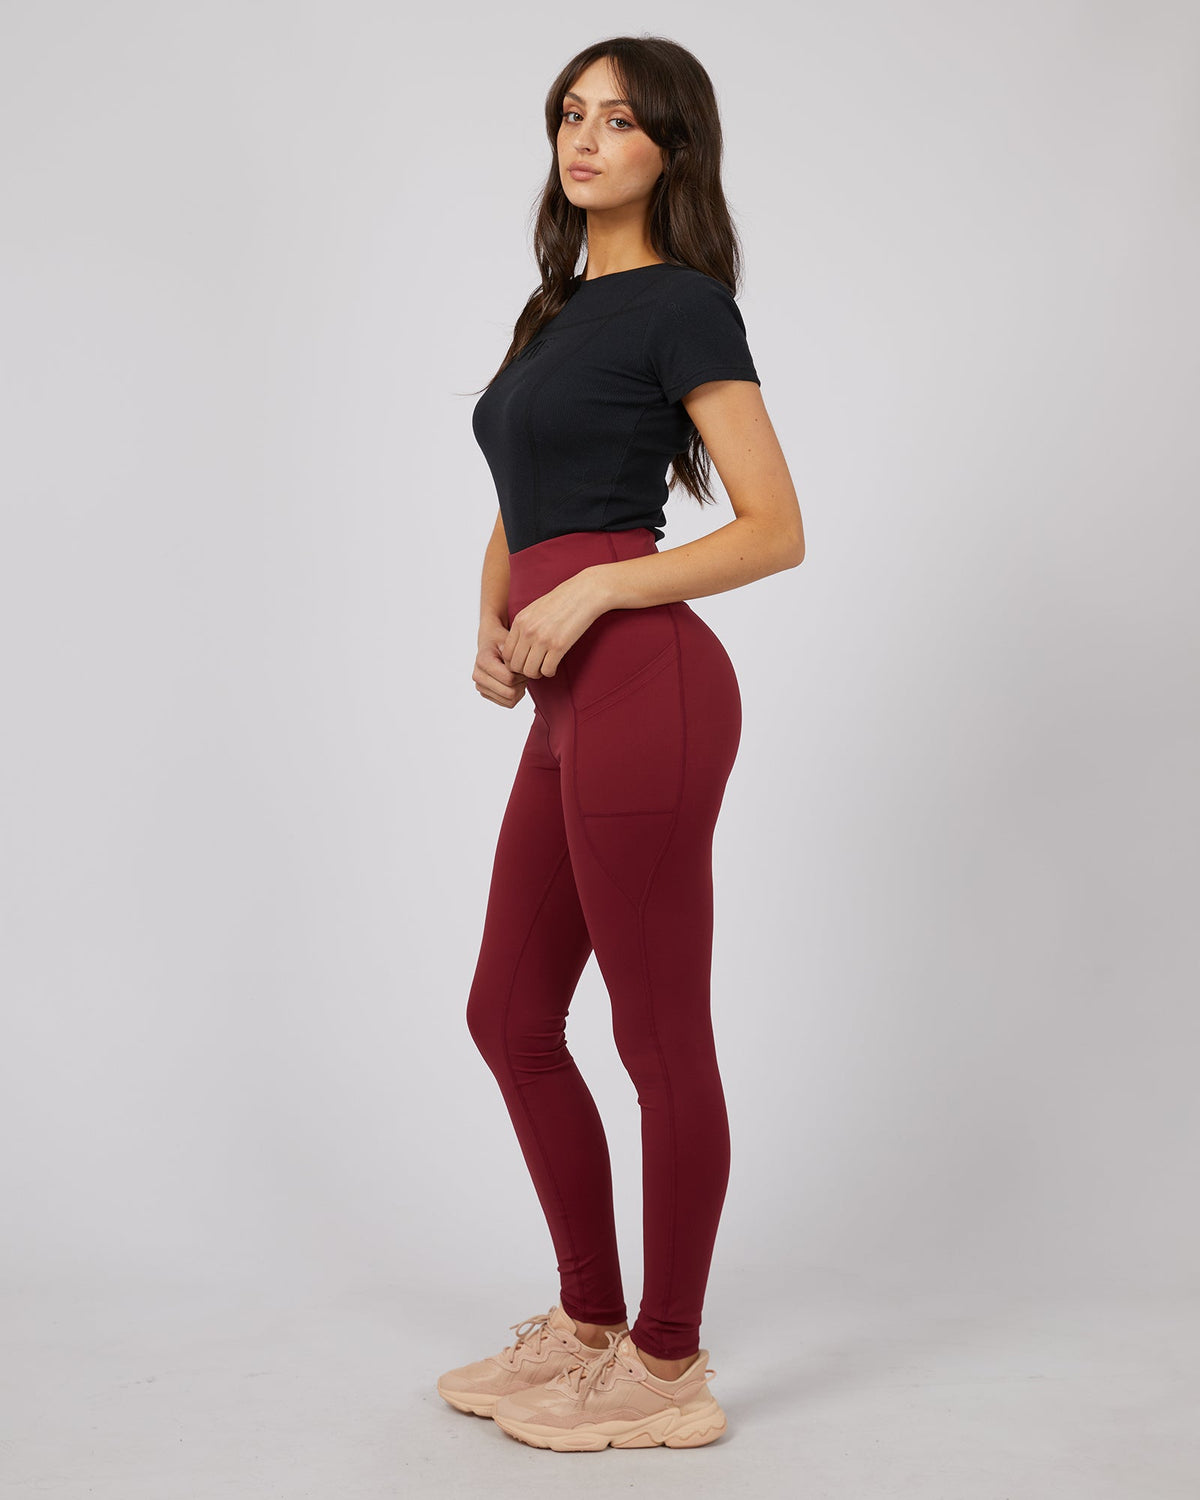 All About Eve-Active Legging Port-Edge Clothing